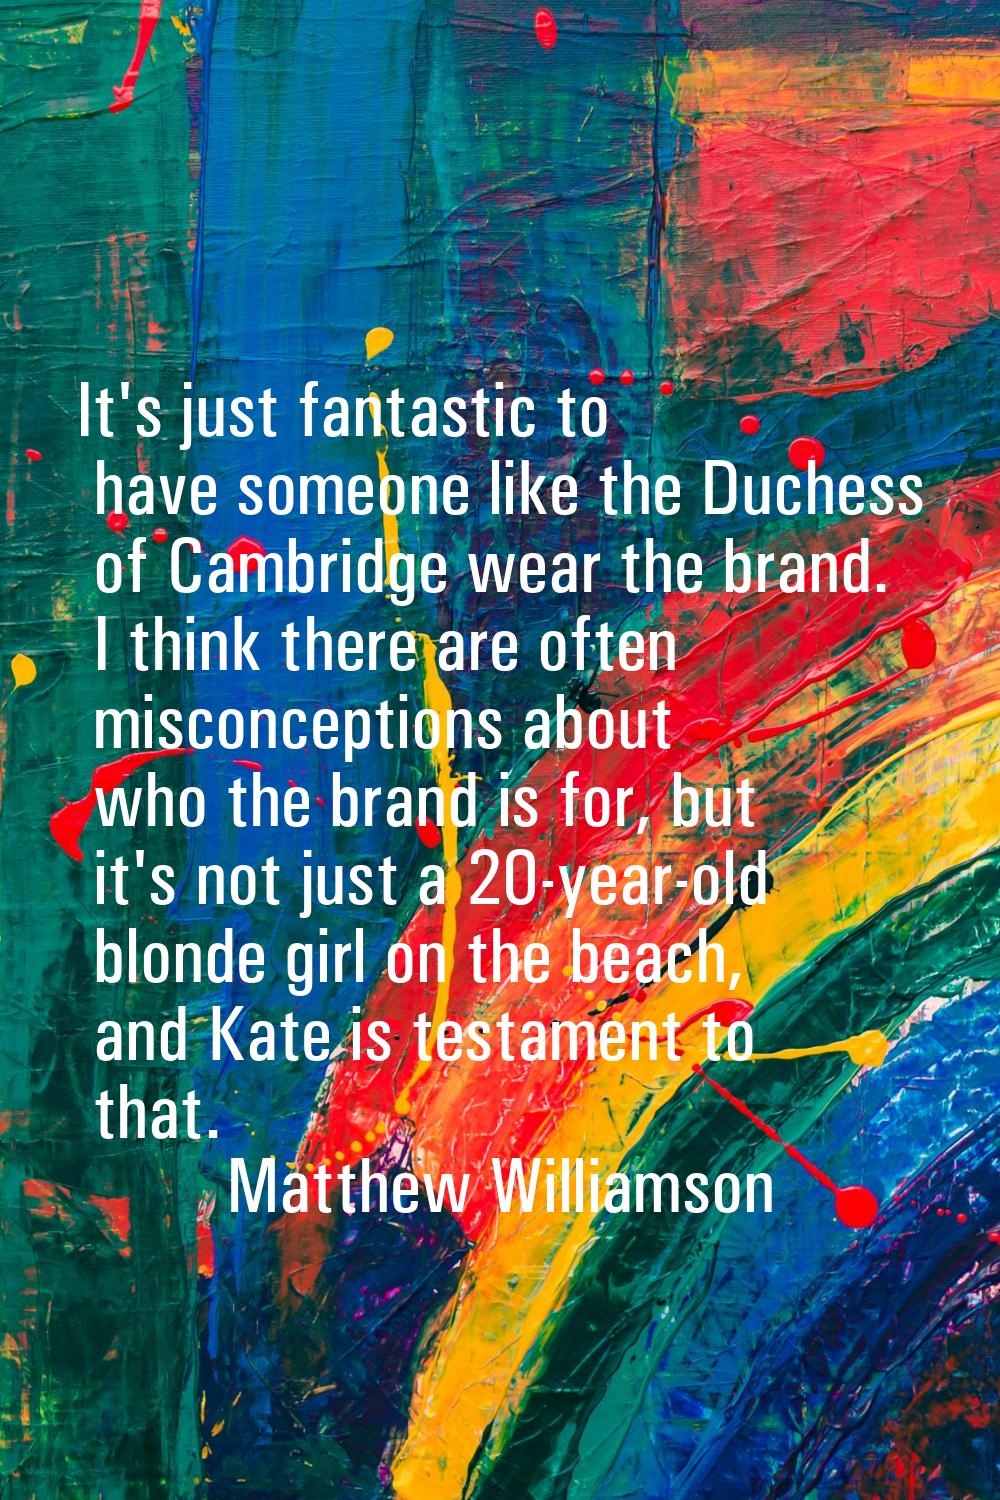 It's just fantastic to have someone like the Duchess of Cambridge wear the brand. I think there are